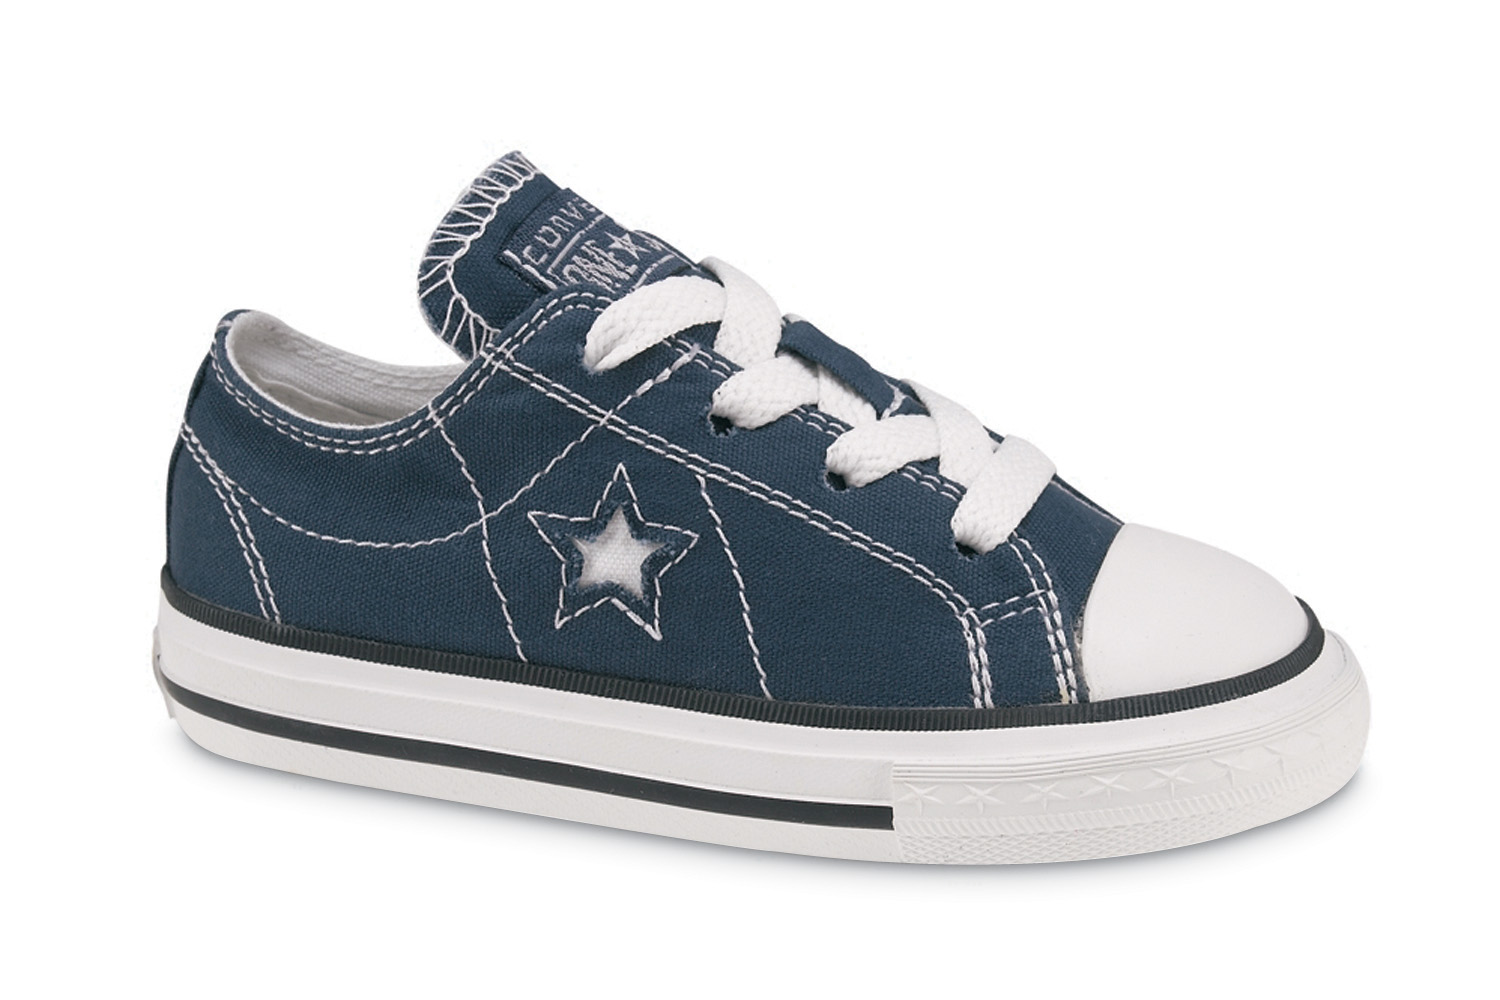 Back-to-School: Converse One Star Fall 2009 Shoes